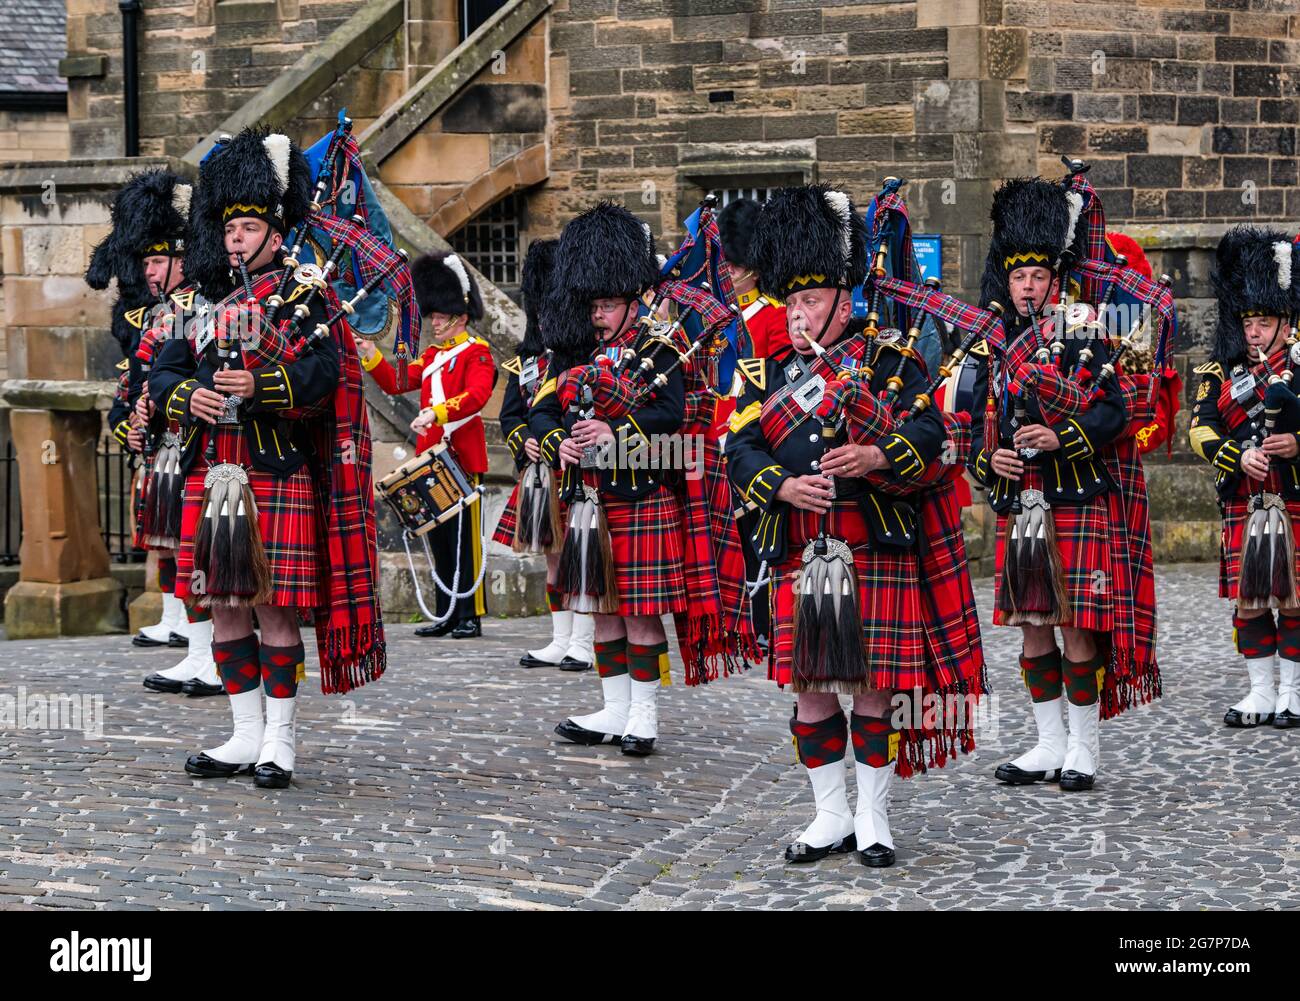 Royal Scots Guards military pipers playing bagpipes in kilt uniforms at Edinburgh Castle in a military ceremony, Scotland, UK Stock Photo